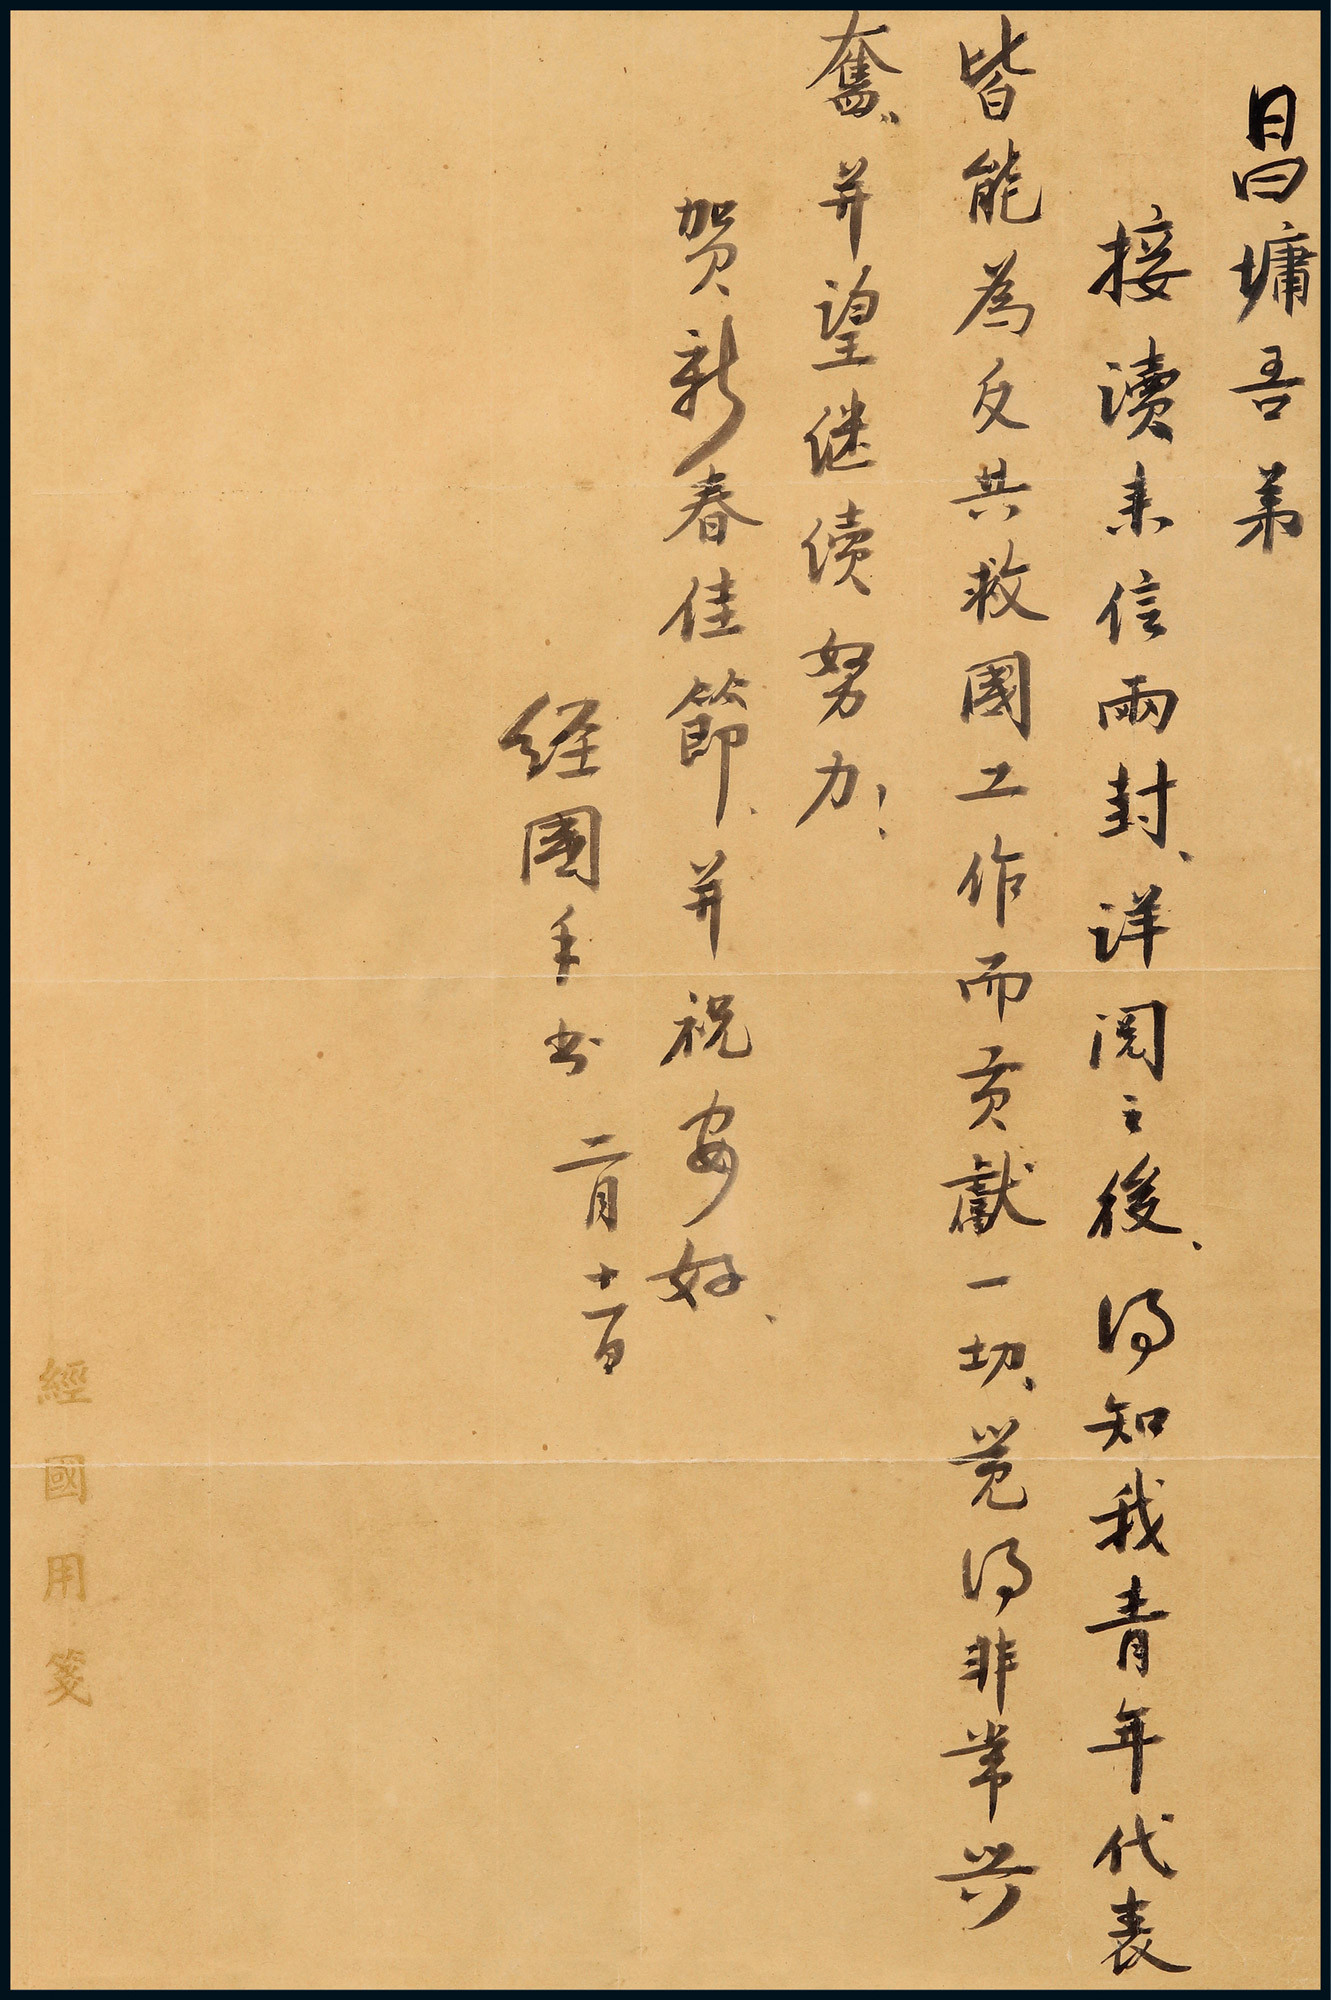 A letter from Chiang Ching-kuo